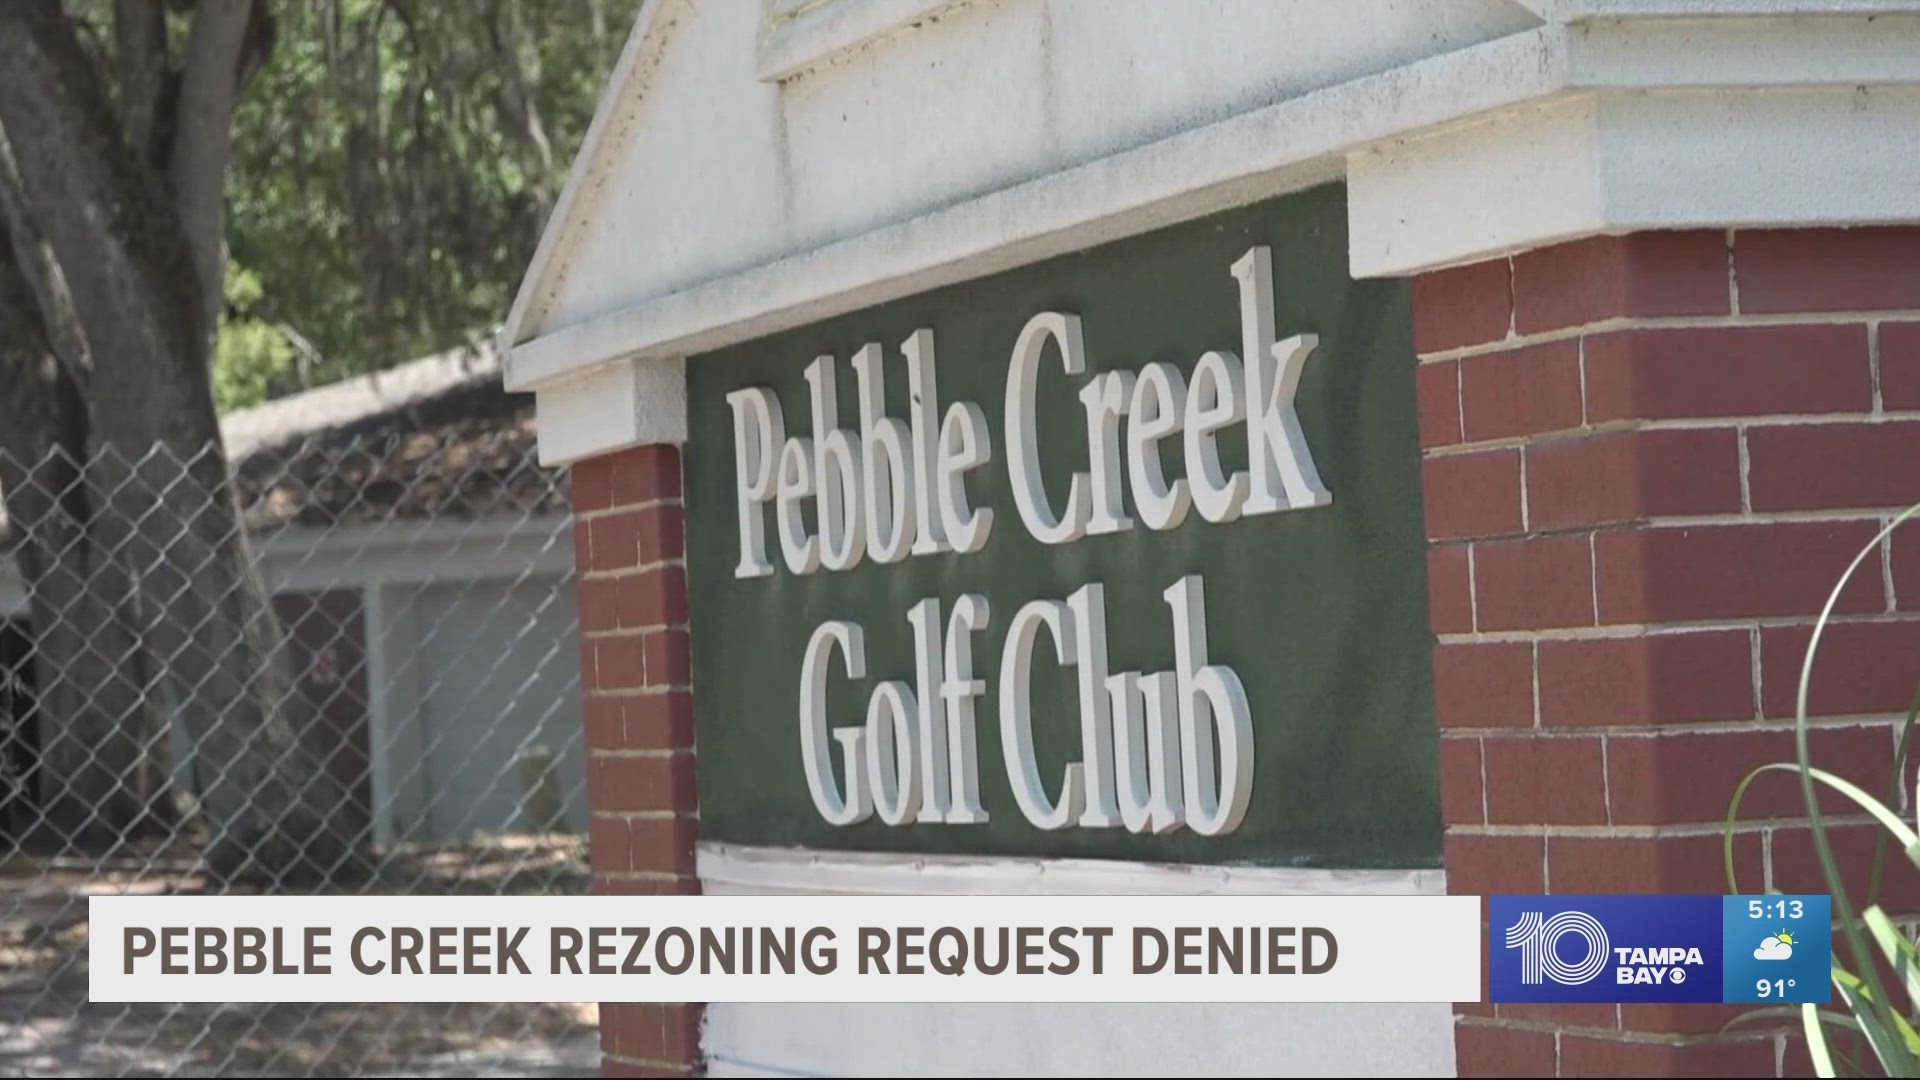 County Commissioners voted 5-2 on Tuesday morning to oppose a plan that would have rezoned the golf course for residential properties.